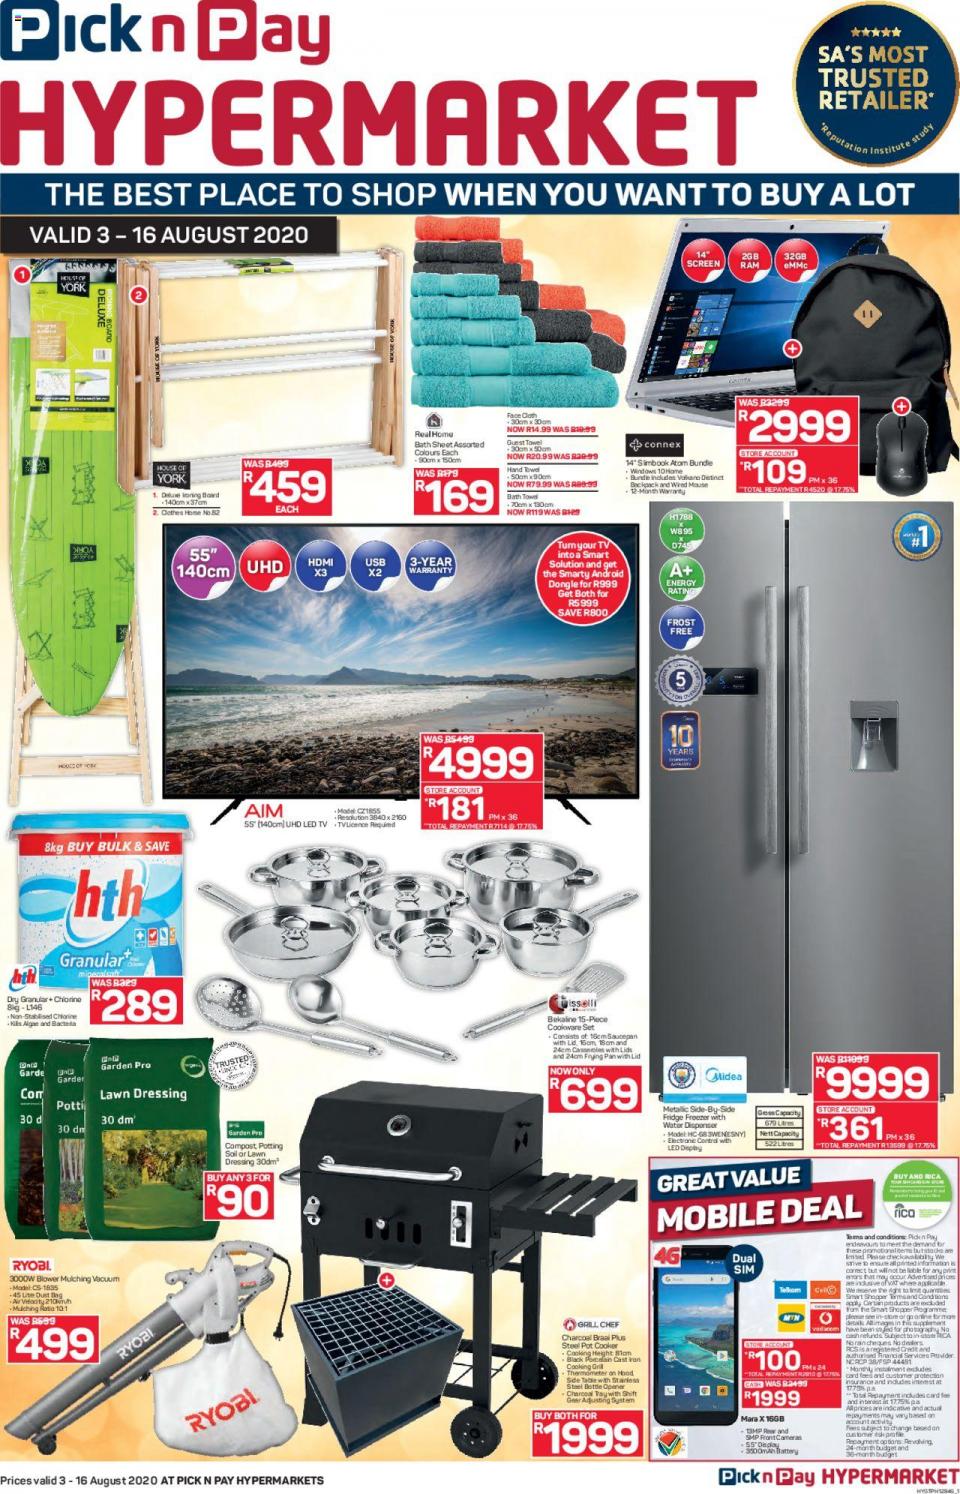 pick n pay specials more savings hypermarkets 3 august 2020